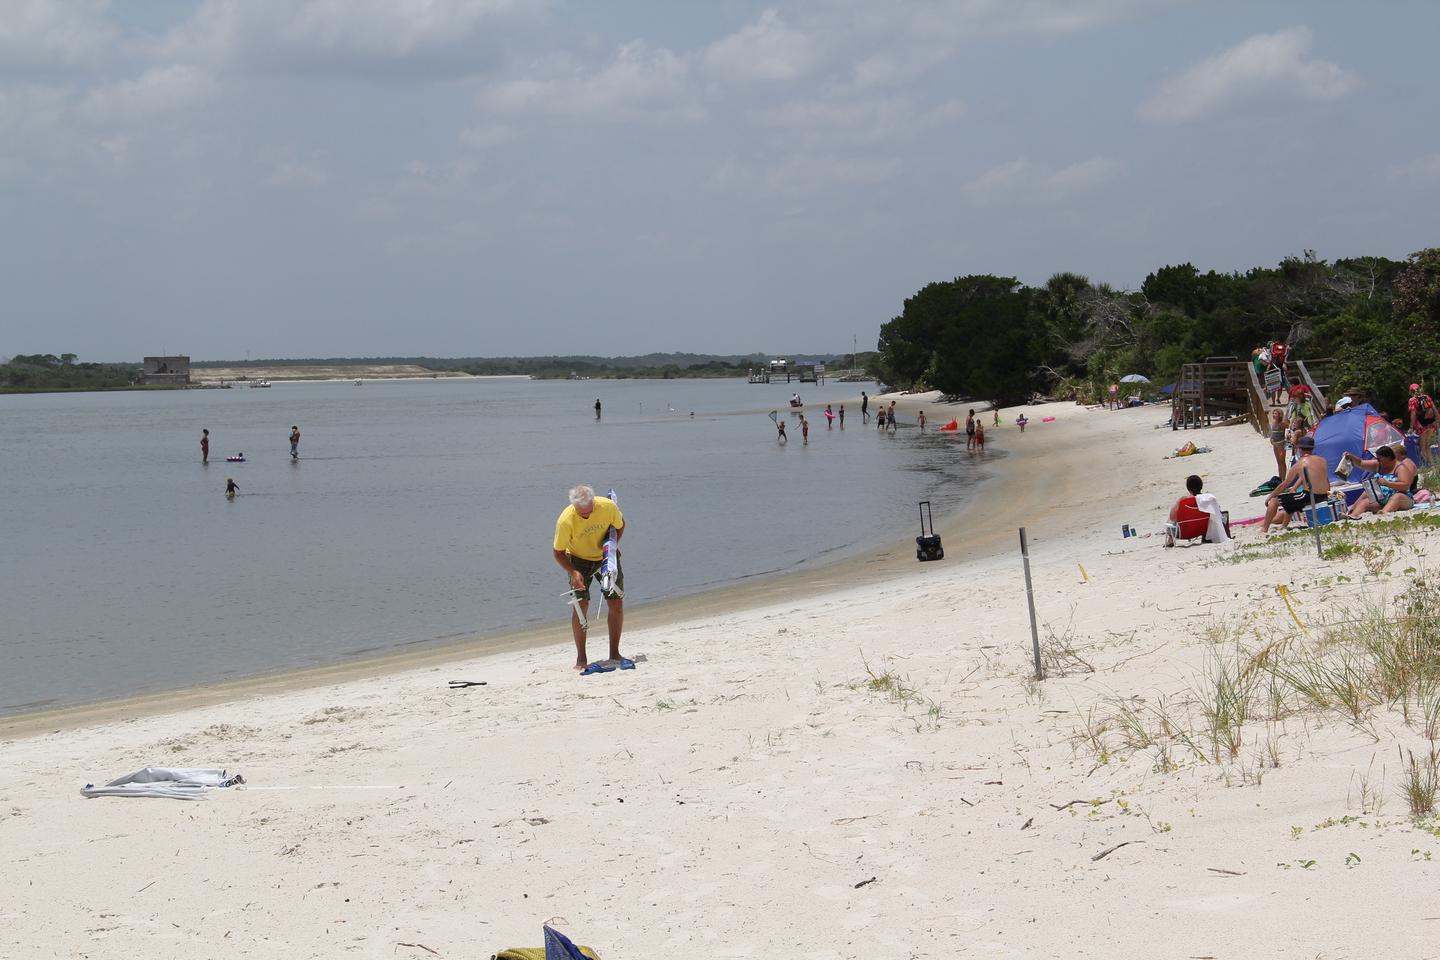 Recreational OpportunitiesMore the half-a-million people visit Fort Matanzas each year to enjoy both the river and ocean beaches.